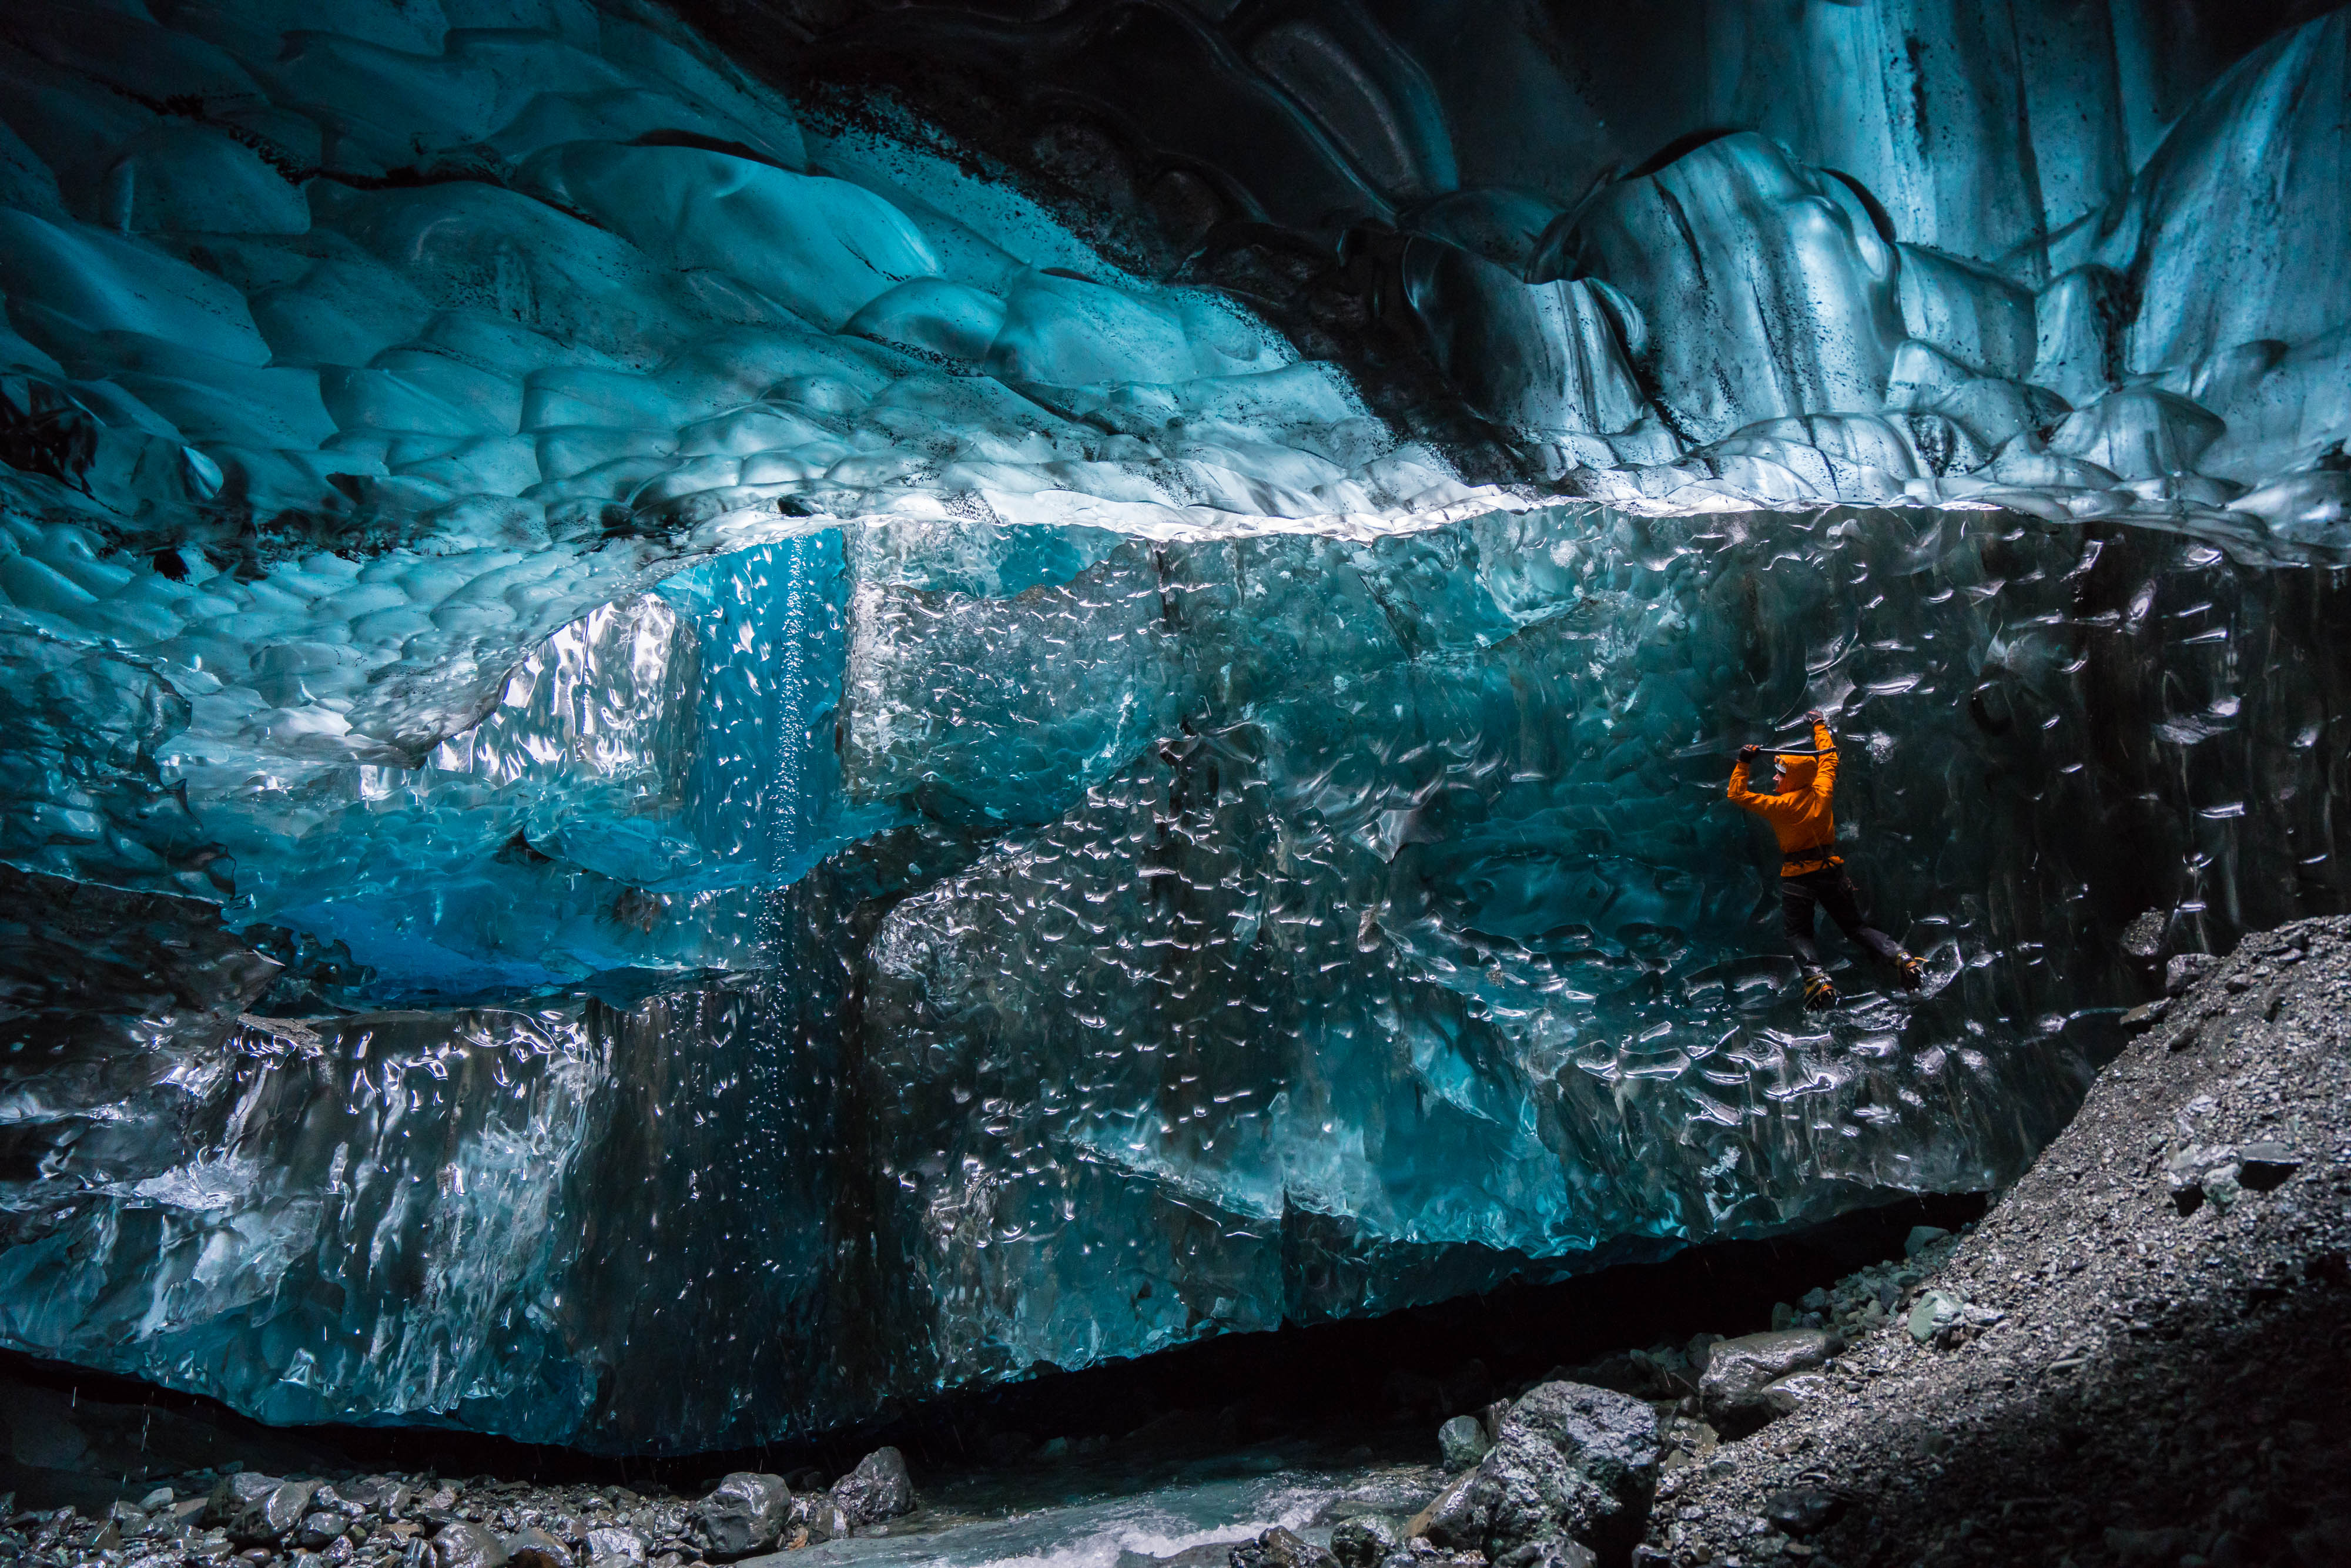 Wednesday 25th November 2015, Vatnajökull national park, Iceland: Photographer Mikael Buck with assistance from renowned local Icelandic guide Einar Runar Sigurdsson, explored the frozen world of Vatnajökull glacier in Iceland using Sonys world first back-illuminated full-frame sensor  which features in the ?7R II camera. His images were taken without use of a tripod or any image stitching techniques in photoshop. This was made possible through Sonys new sensor technology, allowing incredibly detailed low-light hand held photography. Previously images this detailed would have required carrying bulky equipment to the caves, some of which can require hiking and climbing over a glacier for up to two hours to to access. This picture: Guide Einar Runar Sigurdsson is seen ice climbing inside the 'Waterfall Cave' PR Handout - editorial usage only. Photographer's details not to be removed from metadata or byline. For further information please contact Rochelle Collison at Hope & Glory PR on 020 7014 5306 or rochelle.collison@hopeandglorypr.com Copyright: © Mikael Buck / Sony 07828 201 042 / mikaelbuck@gmail.com